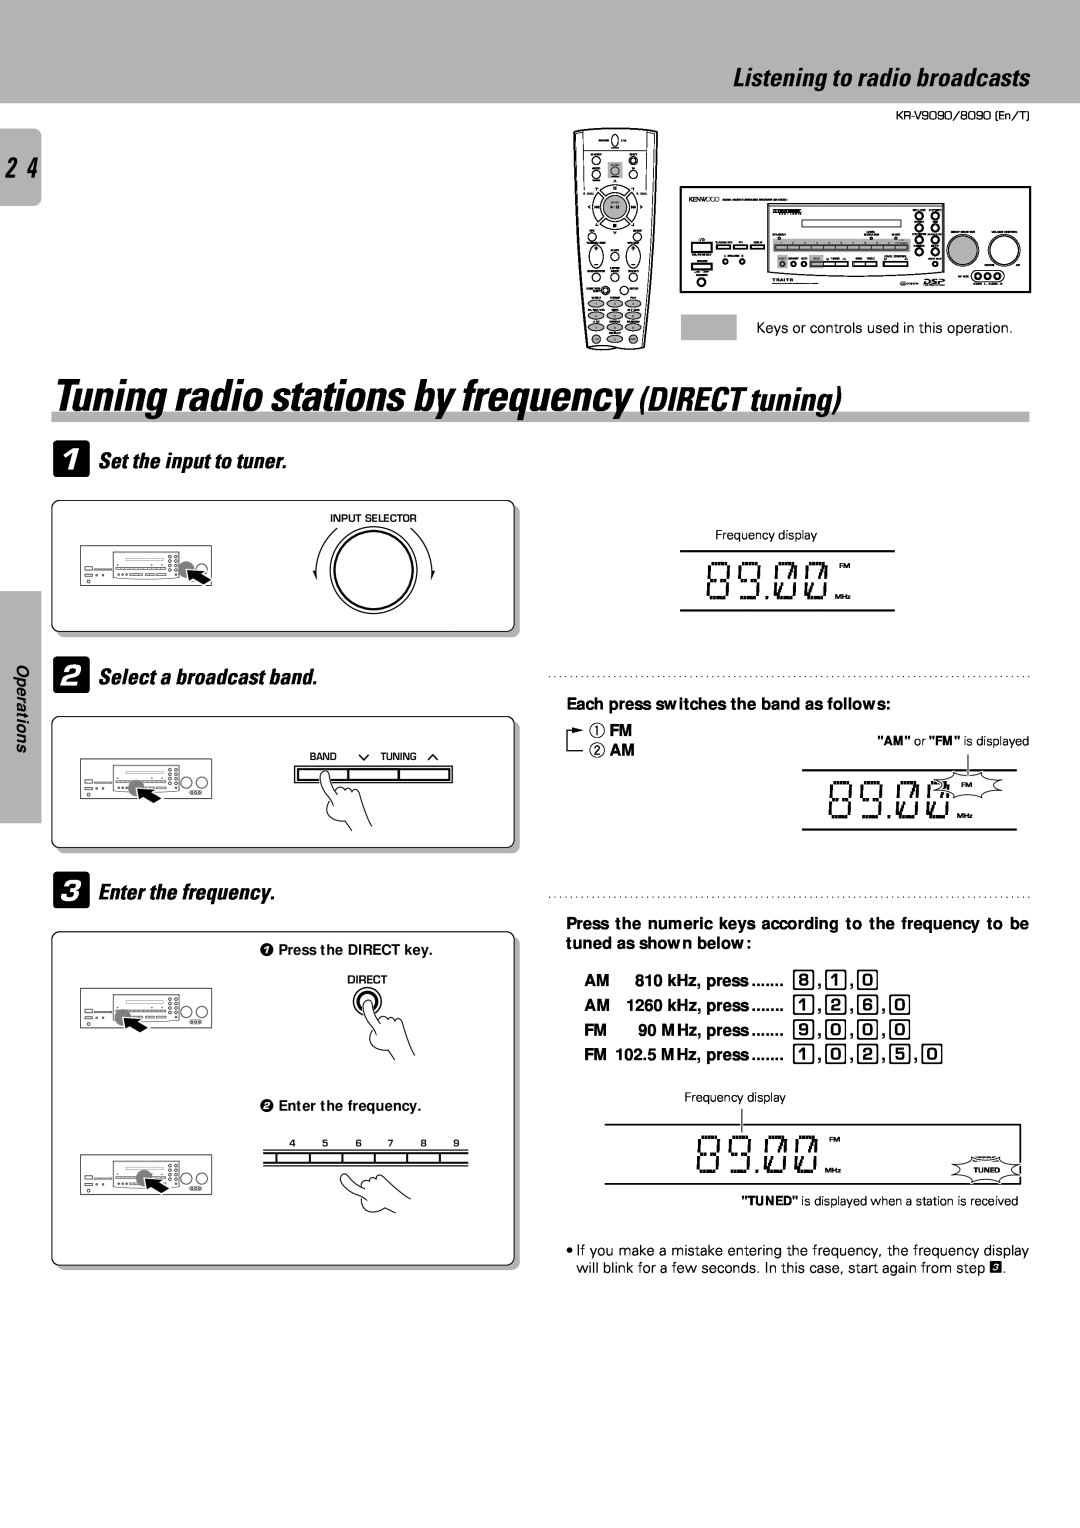 Kenwood KR-V9090 Tuning radio stations by frequency DIRECT tuning, Listening to radio broadcasts, 3Enter the frequency 